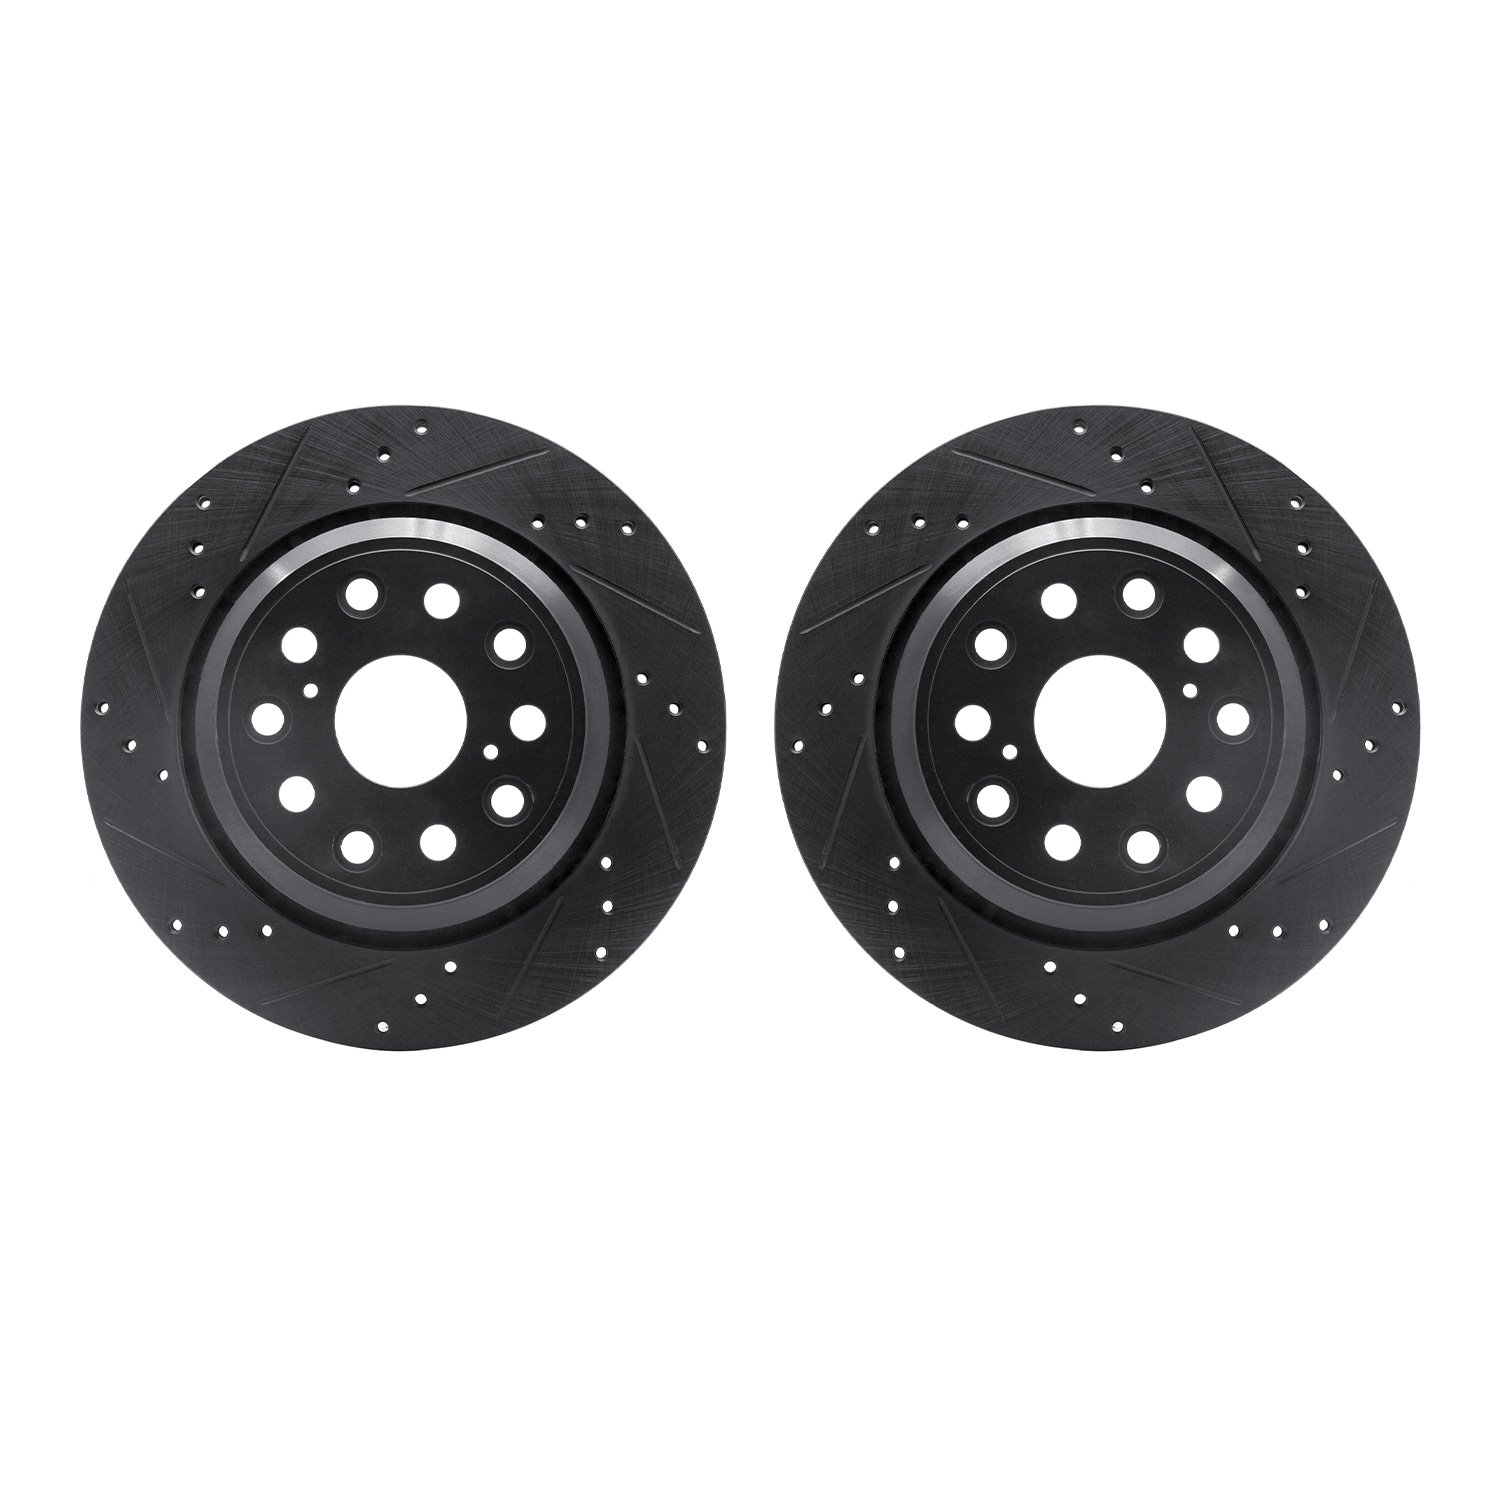 8002-75033 Drilled/Slotted Brake Rotors [Black], 2007-2017 Lexus/Toyota/Scion, Position: Rear